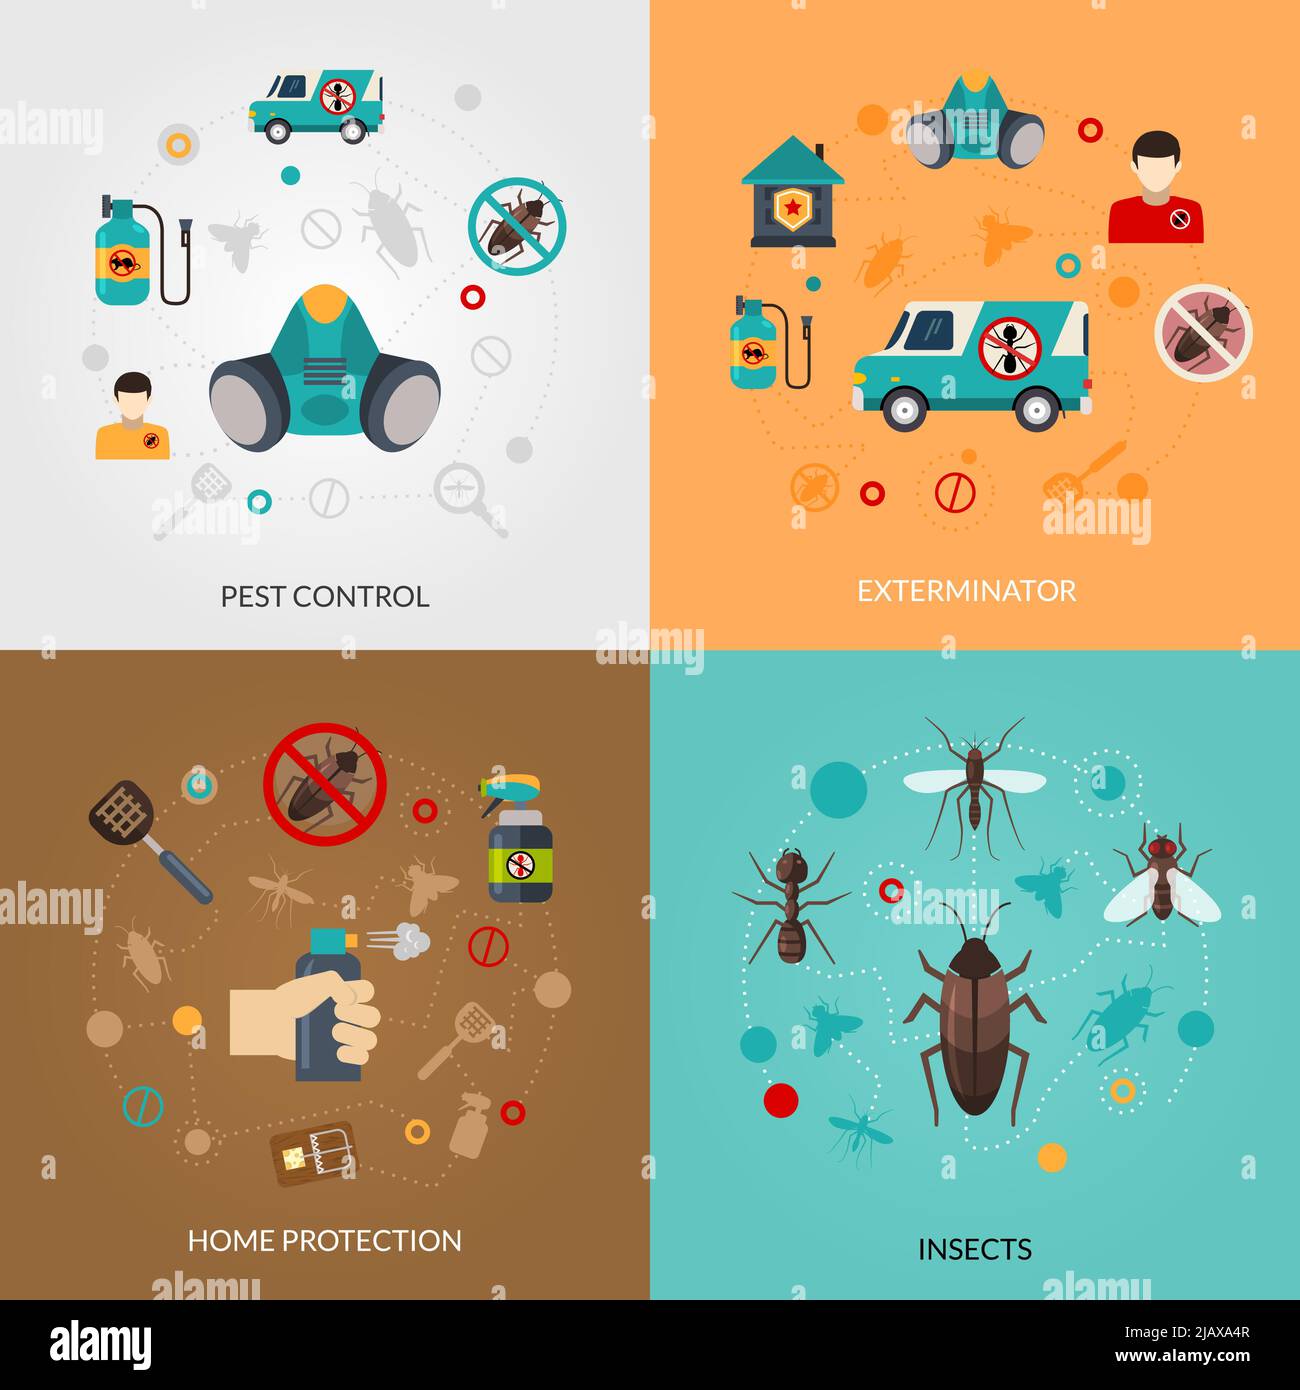 Home pest control services 4 flat icons square composition for detecting exterminating insects and rodents abstract isolated vector illustration Stock Vector